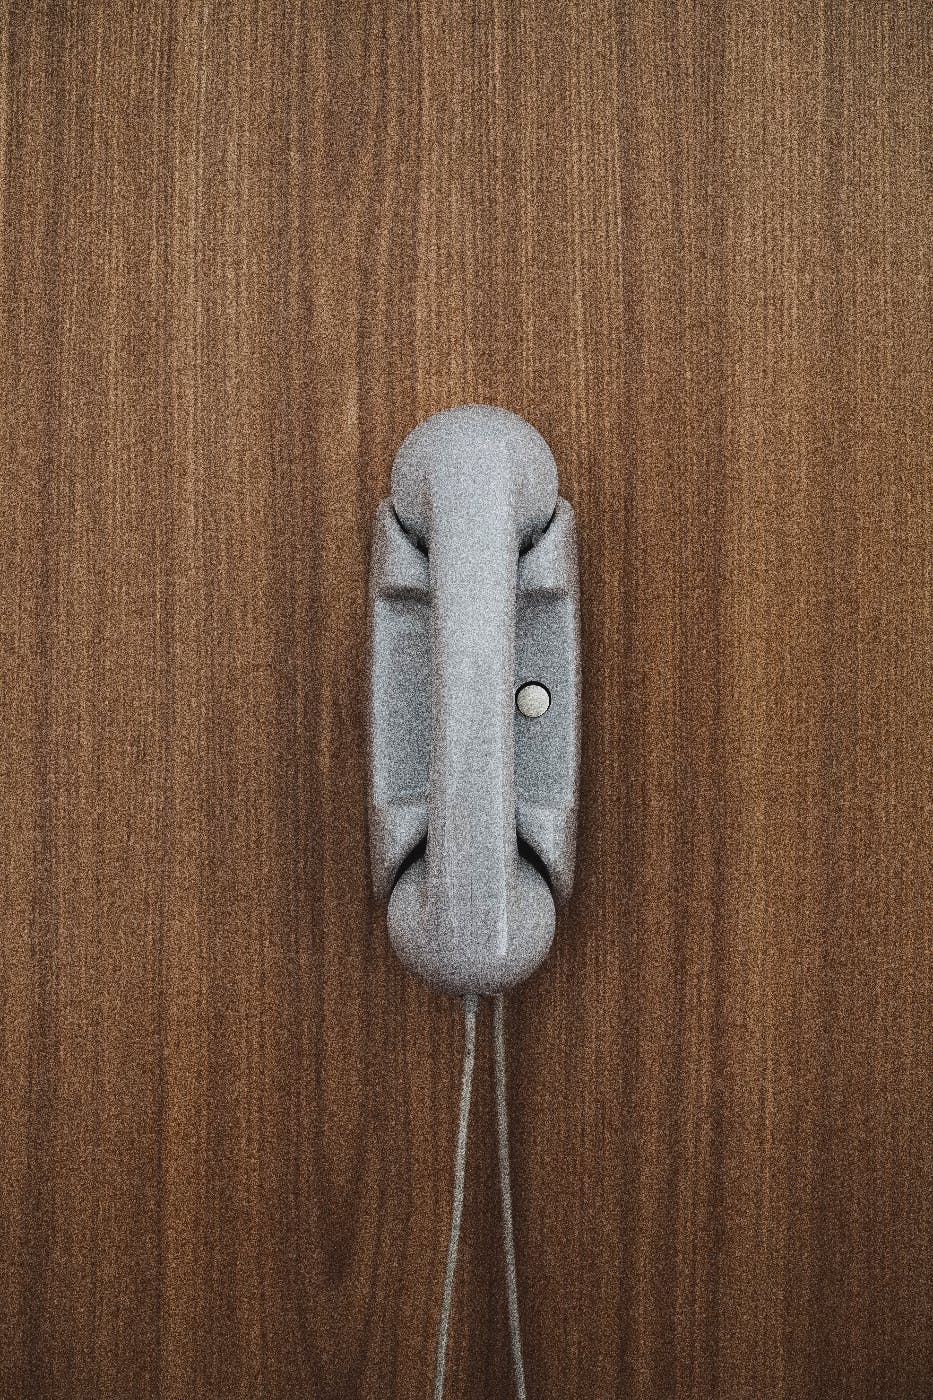 a gray phone with one button hanging on a wood panel wall